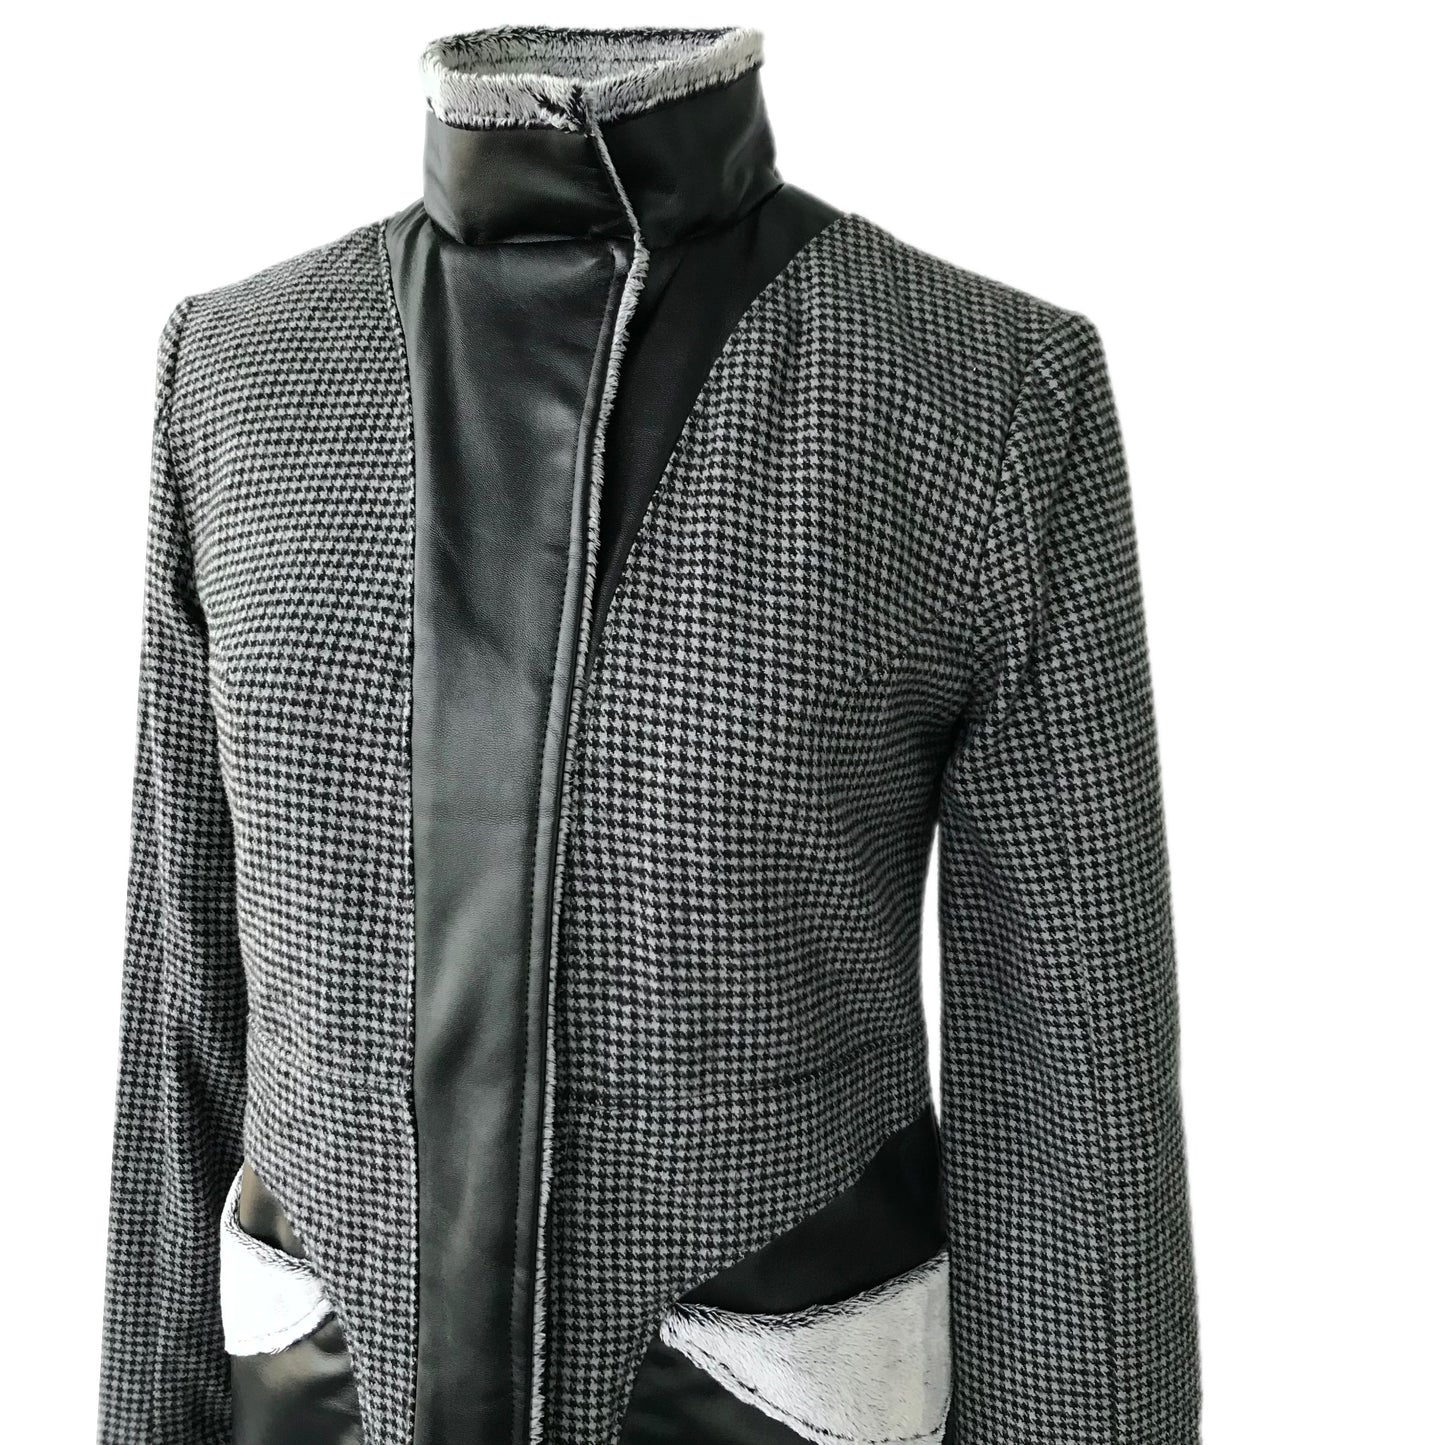 Houndstooth Women's Coat - Vegan Leather and Fur - Size Small